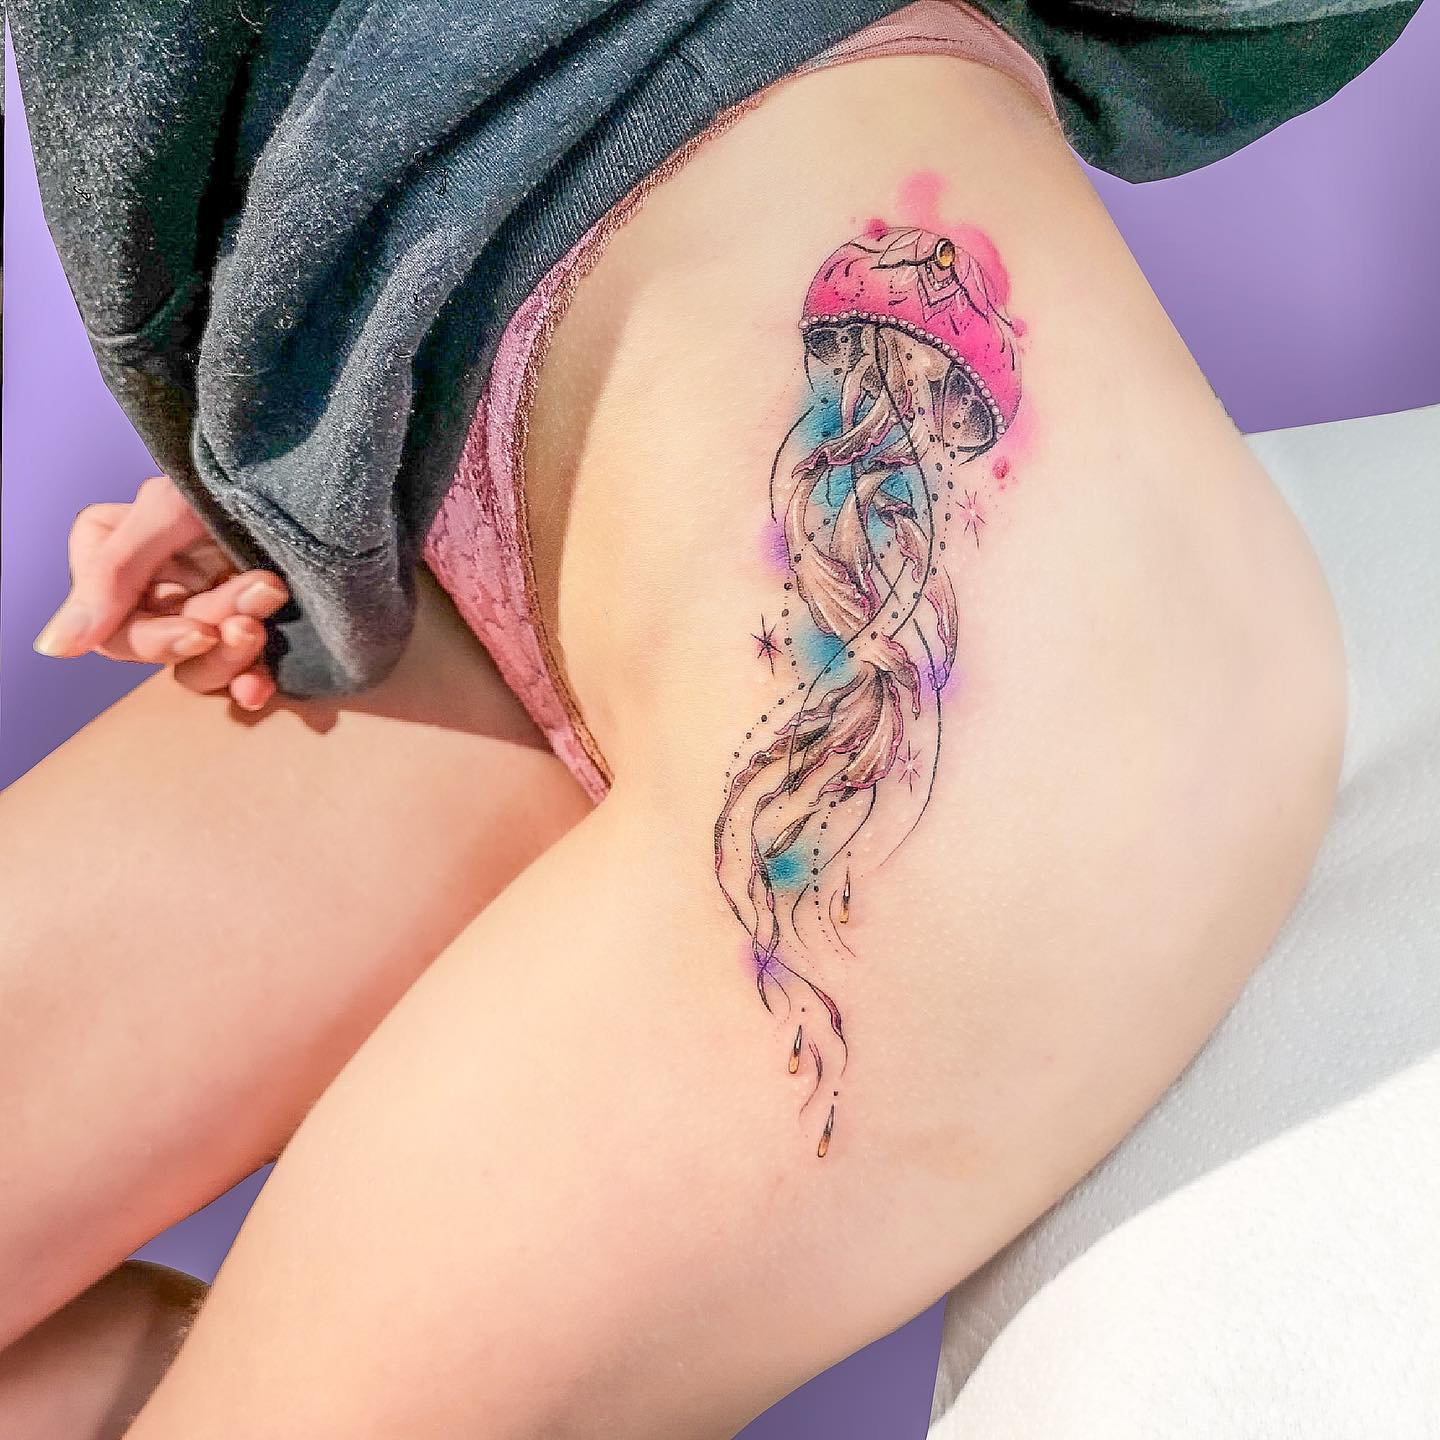 Some women like fun pop of color. Do you? If so, this retro little water creature will suit you. Show that you’re a fun and loving creative person with this watercolor artsy design.